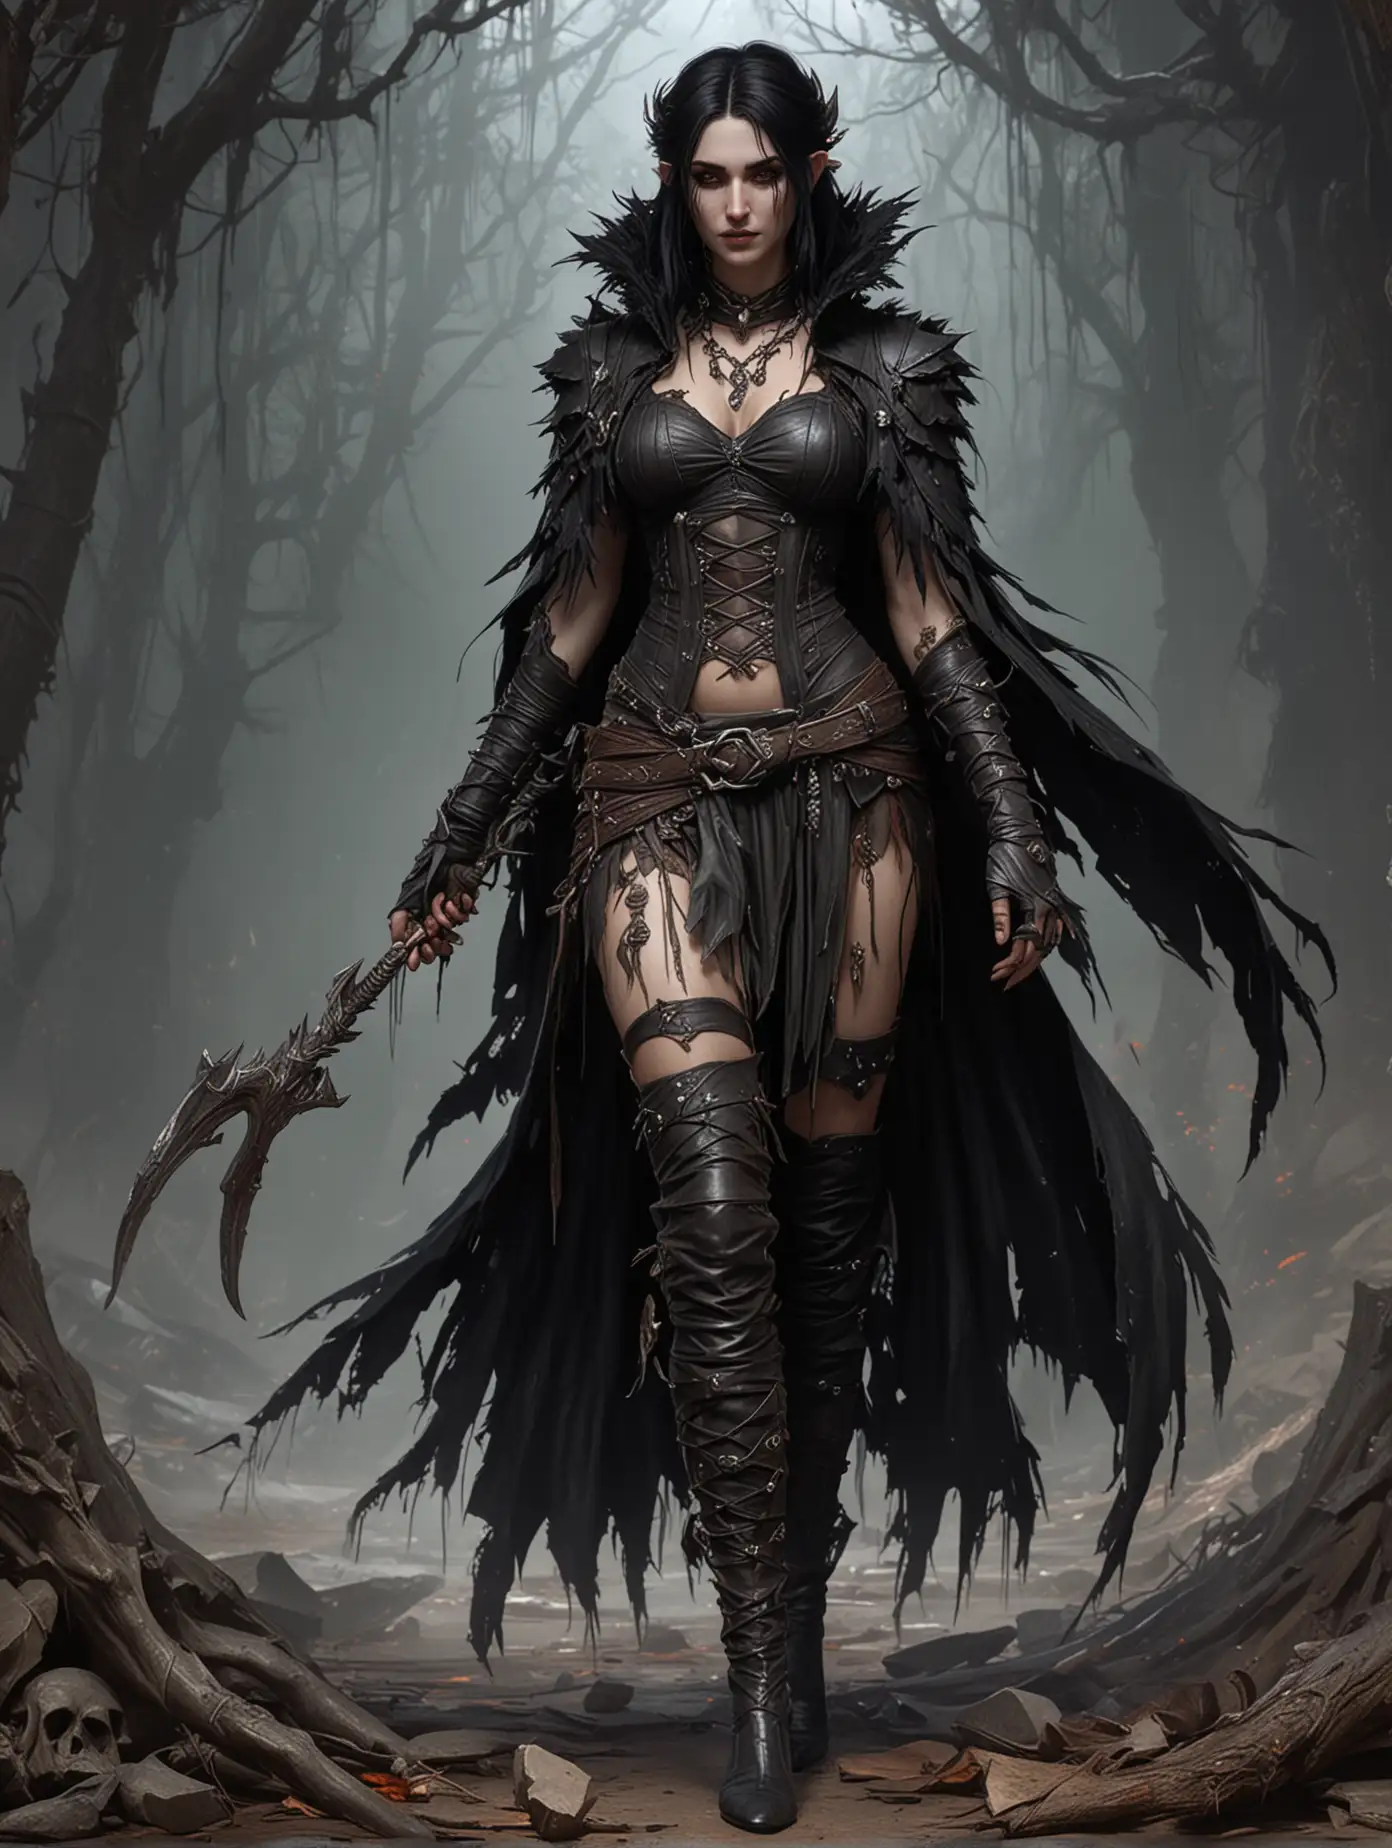 Dark druid, morrigan dragon age, torn clothes, fantasy character design, louis royo style, fullbody, goth clothes, yennefer